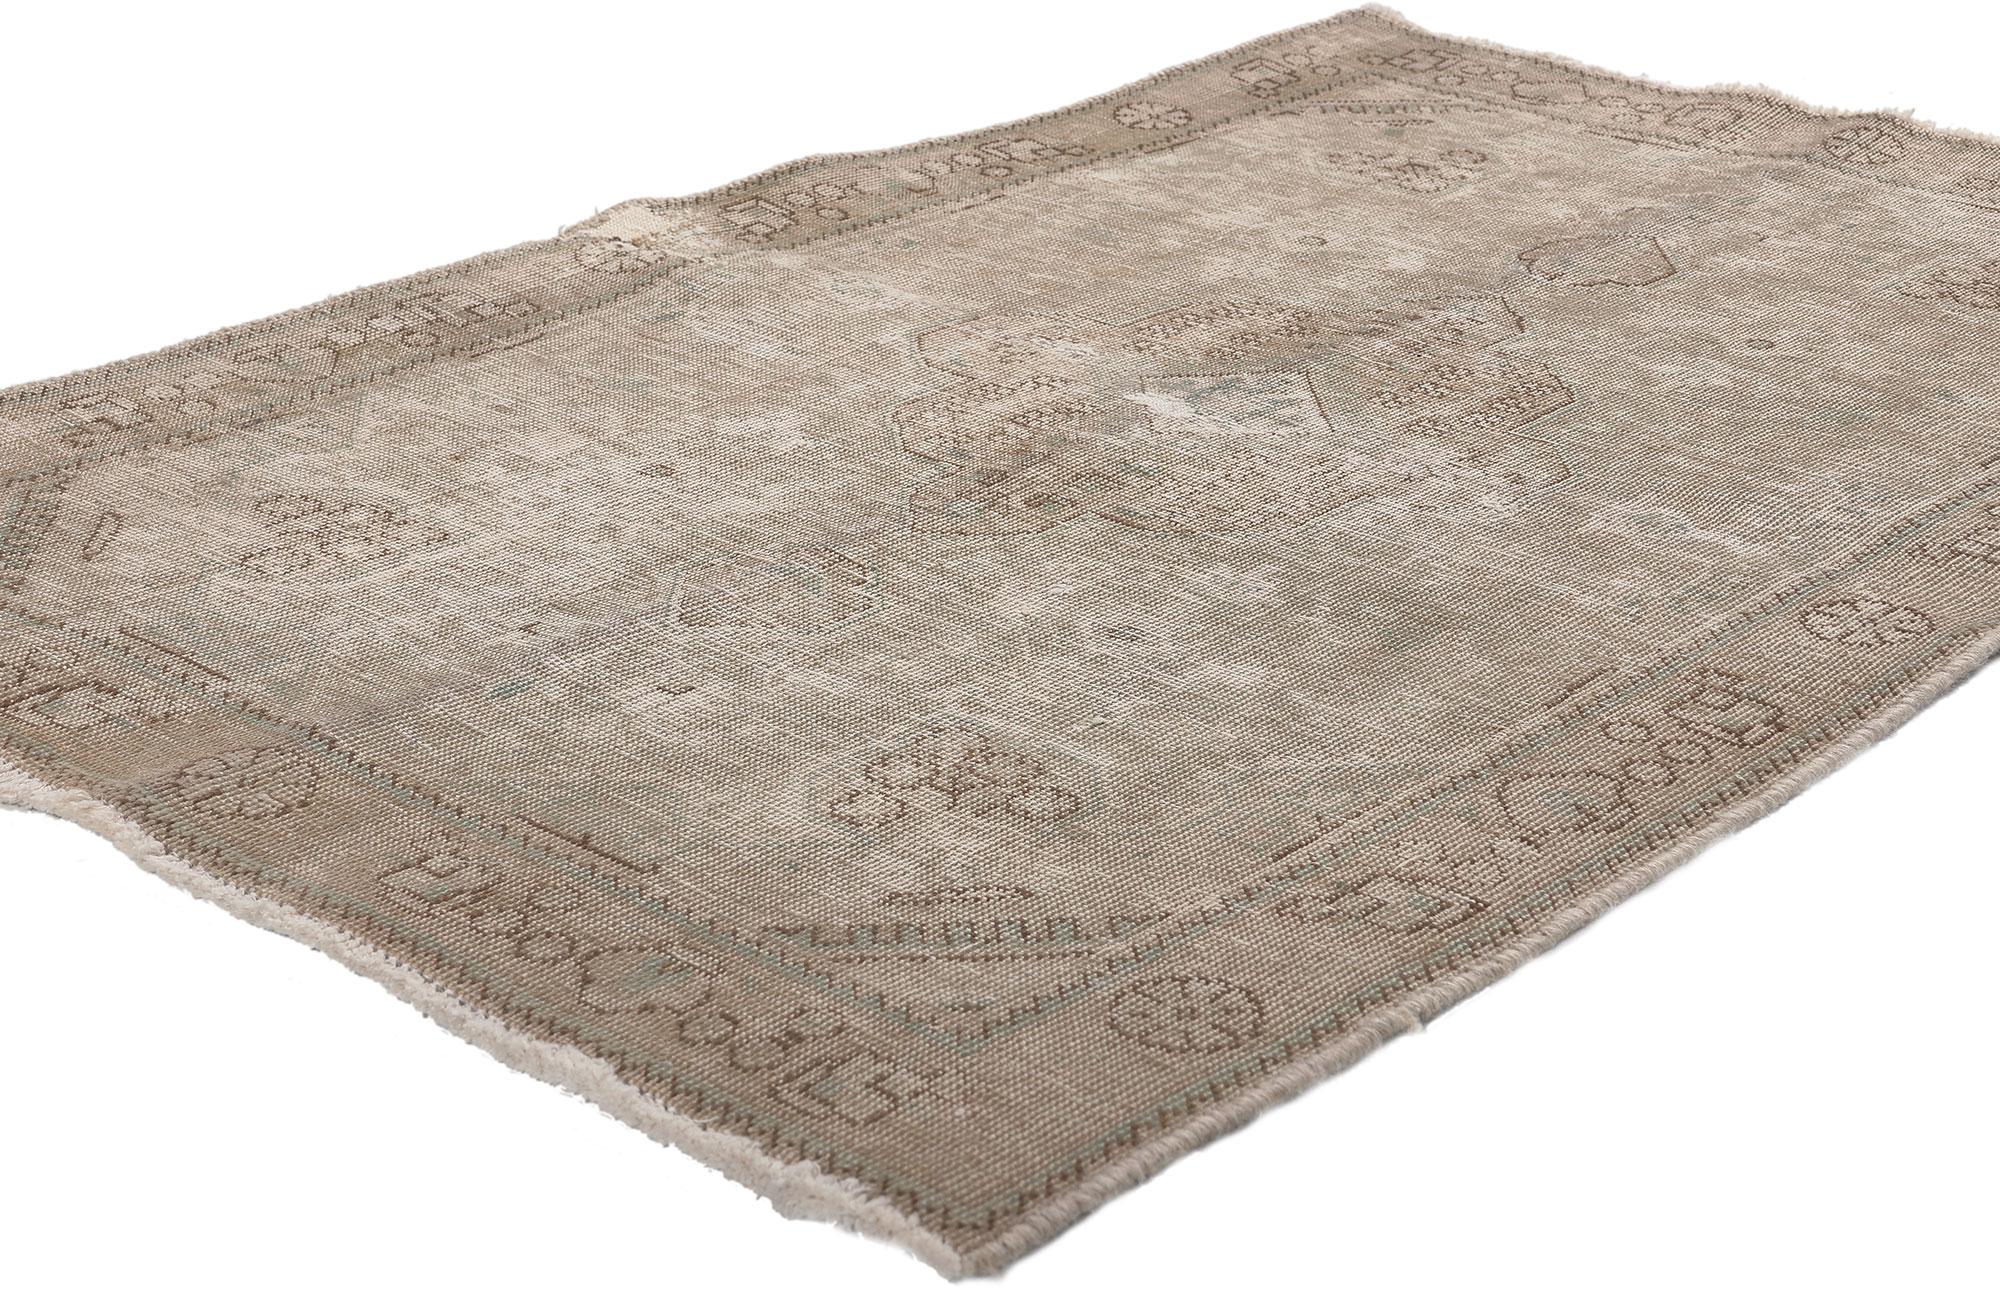 78573 Distressed Vintage Persian Tabriz Rug, 03'01 x 04'07. Vintage charm meets modern luxe in this distressed vintage Persian rug. The rustic elegance and muted earth-tone color palette woven into this piece work together creating a truly